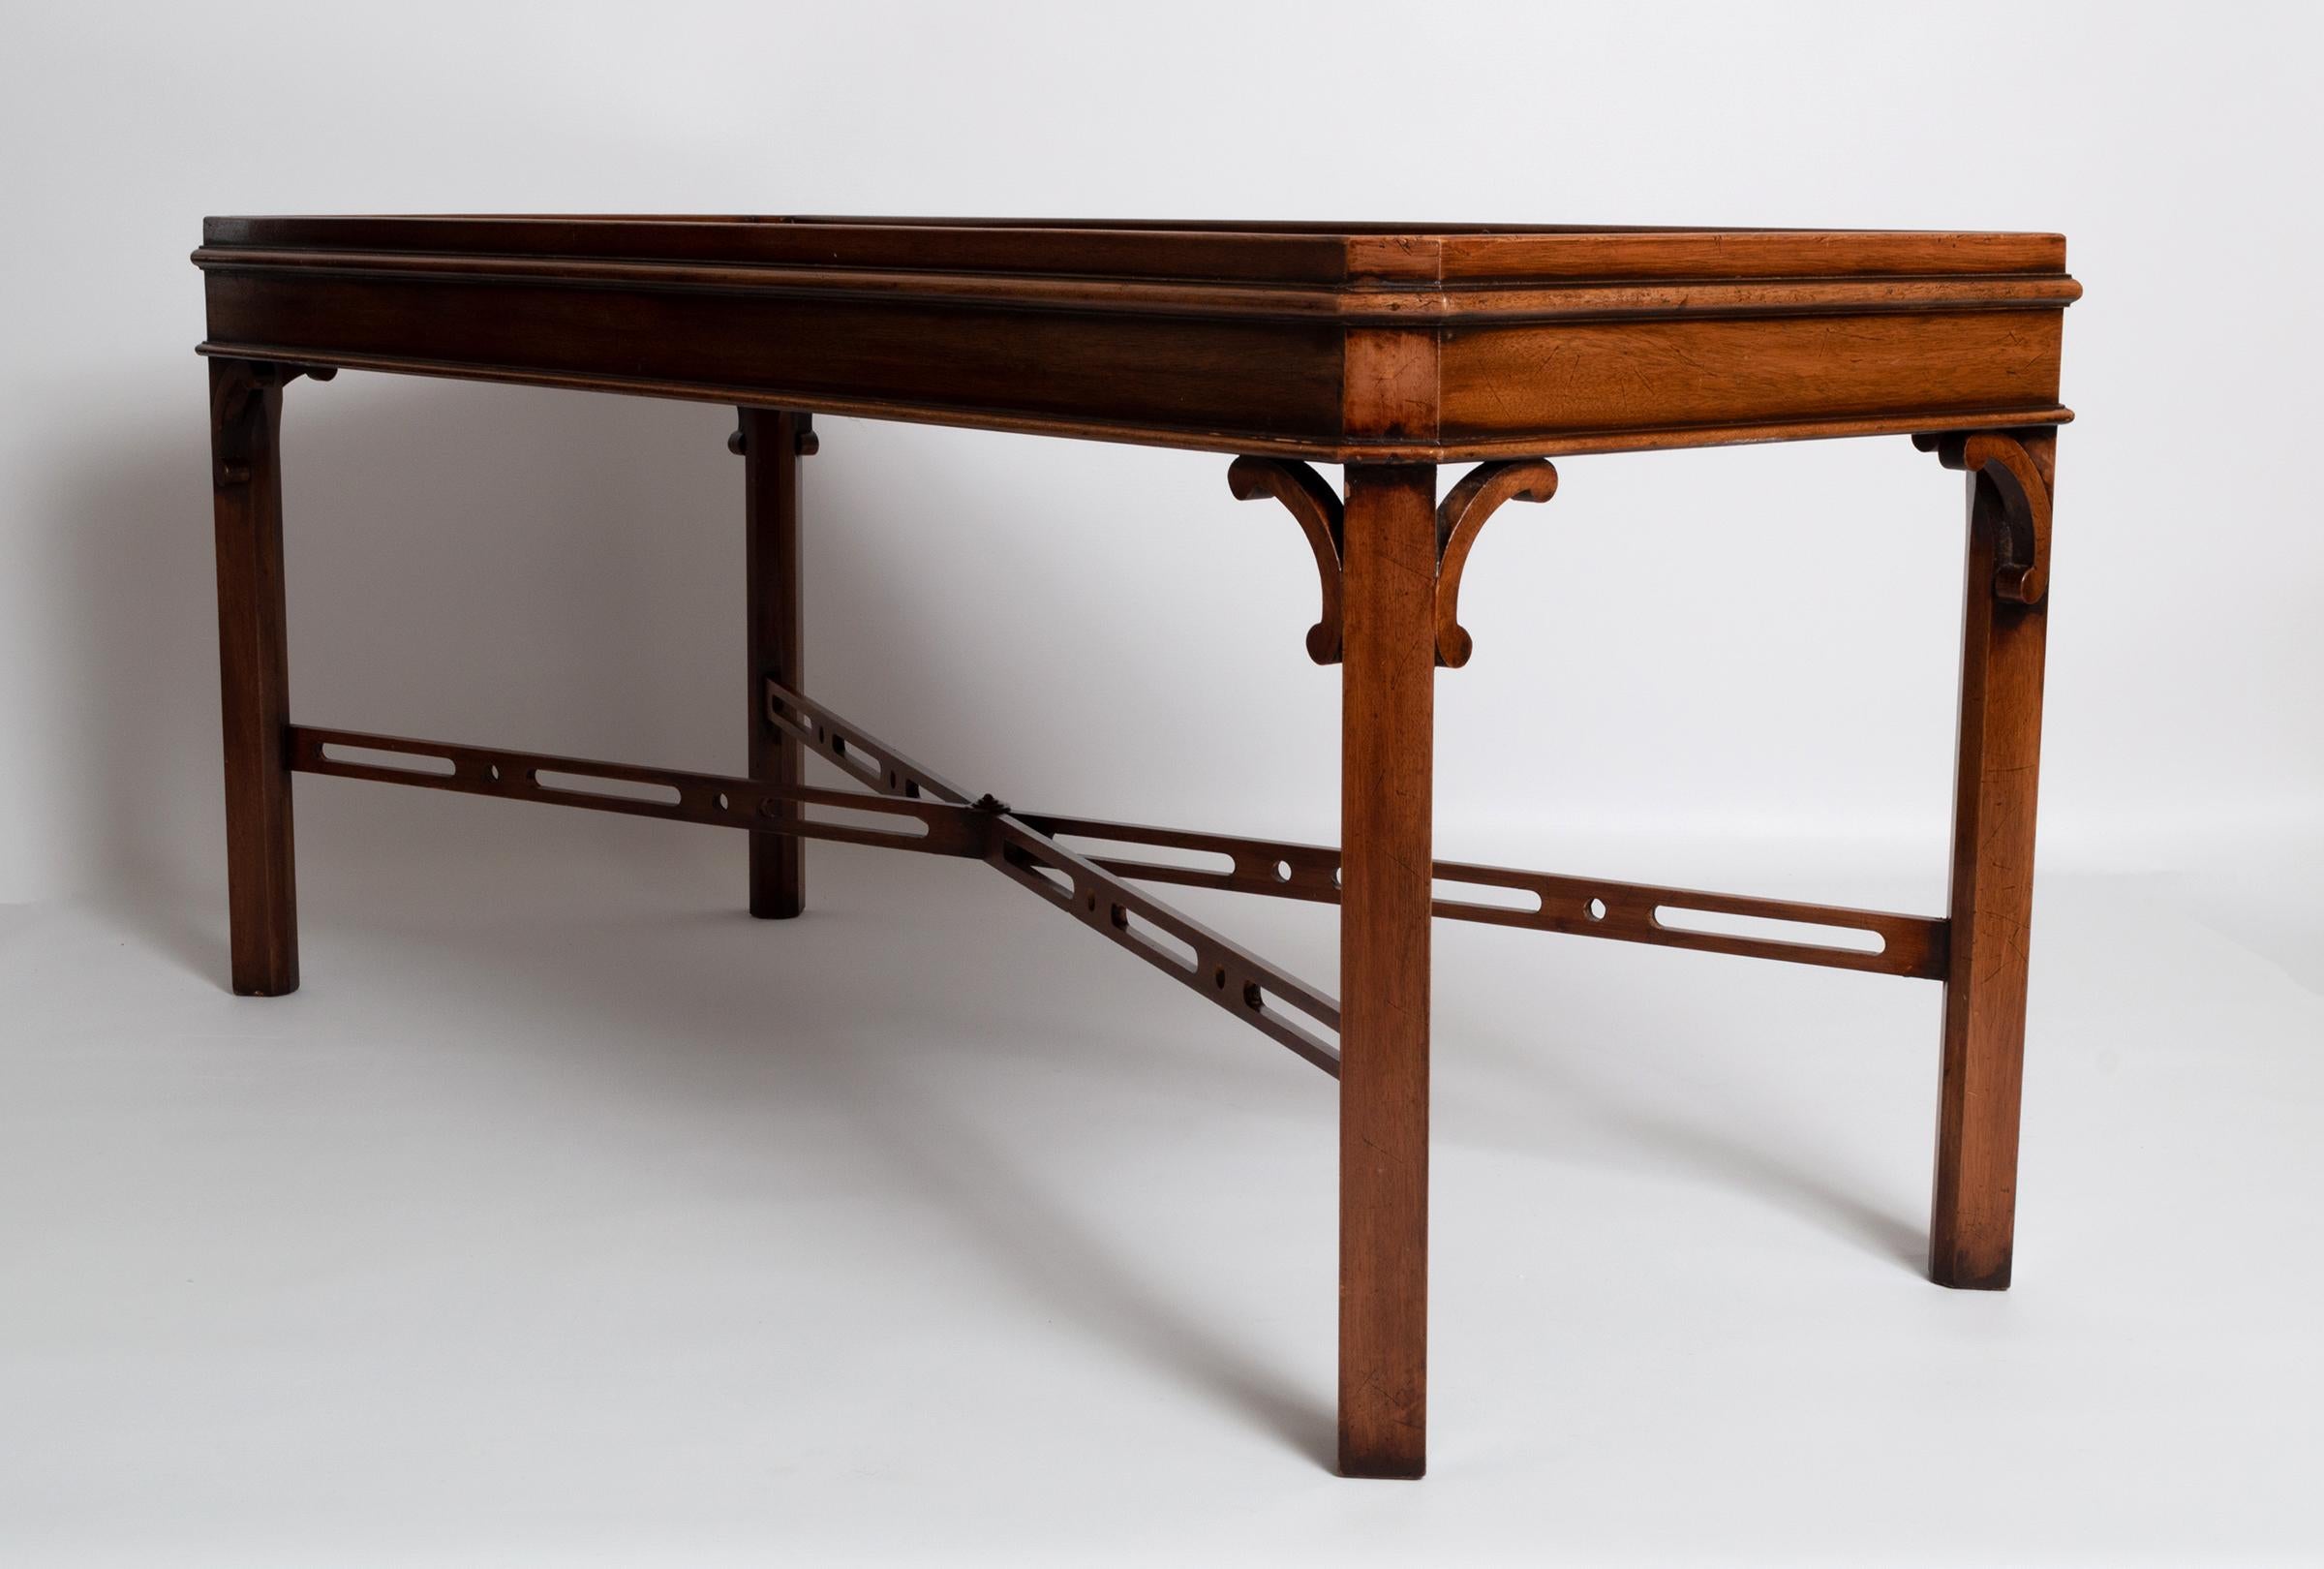 English Georgian Chippendale Style Mahogany Coffee Table by Brights of Nettlebed 1